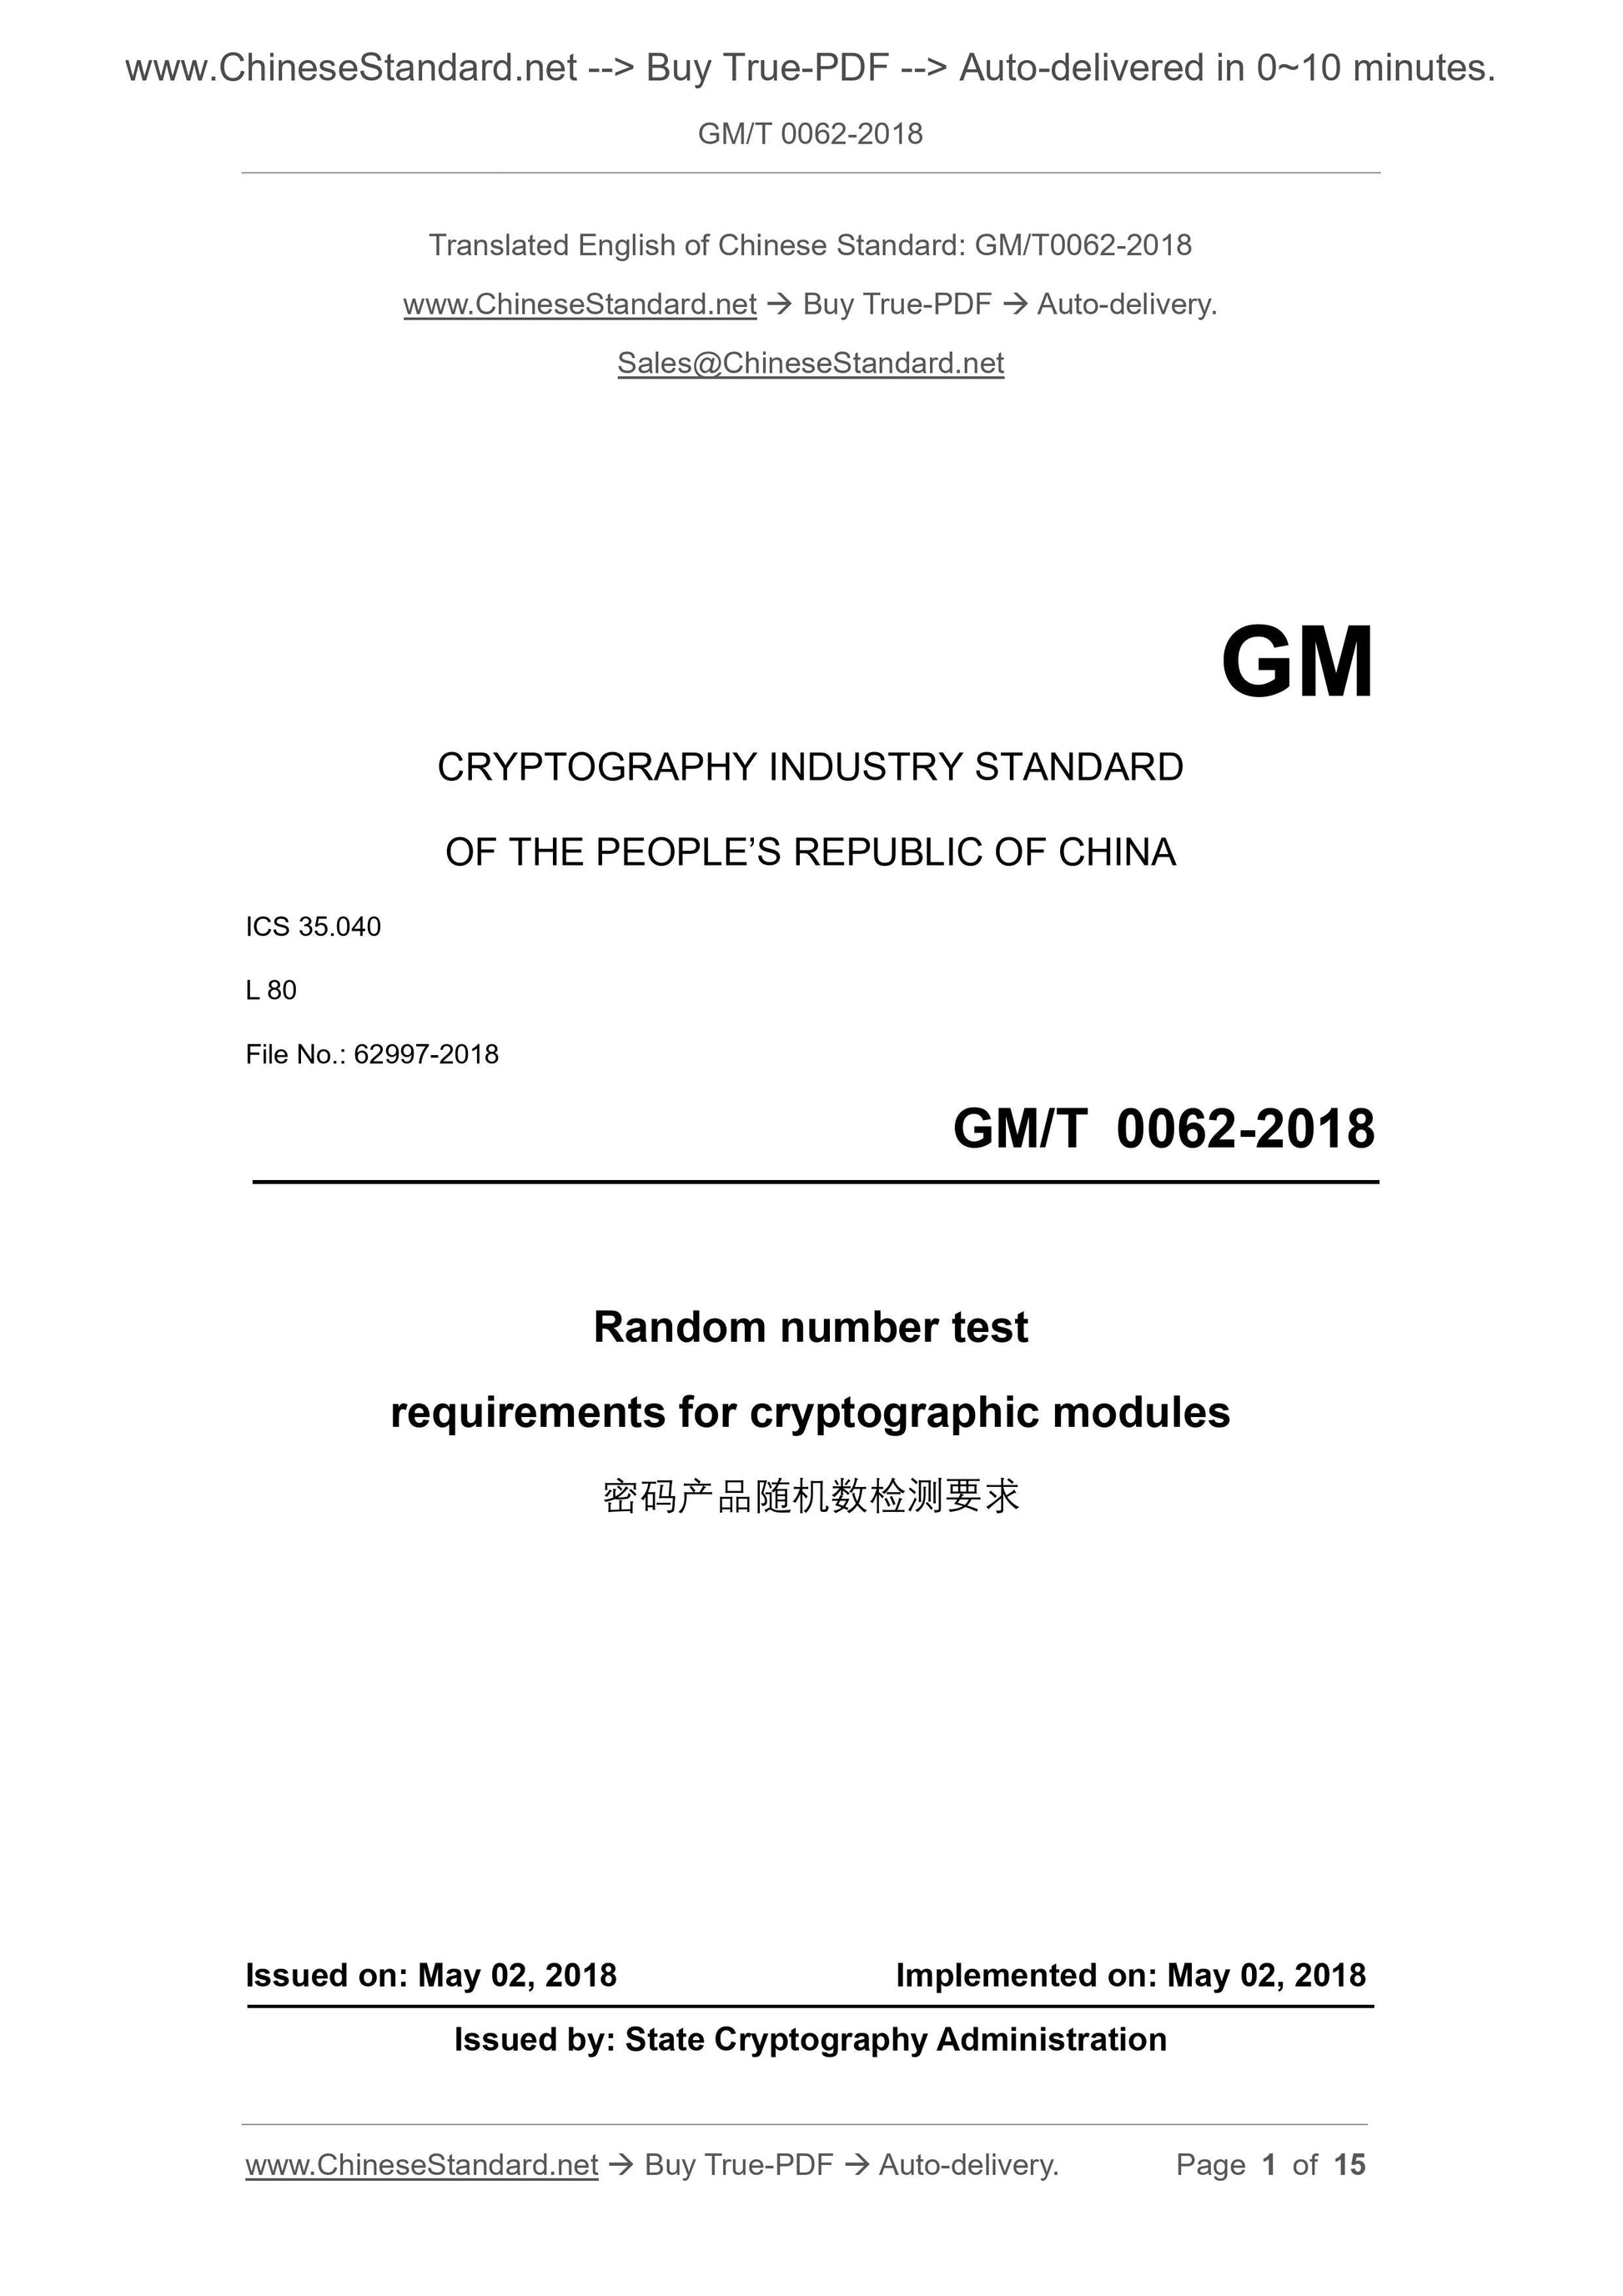 GM/T 0062-2018 Page 1